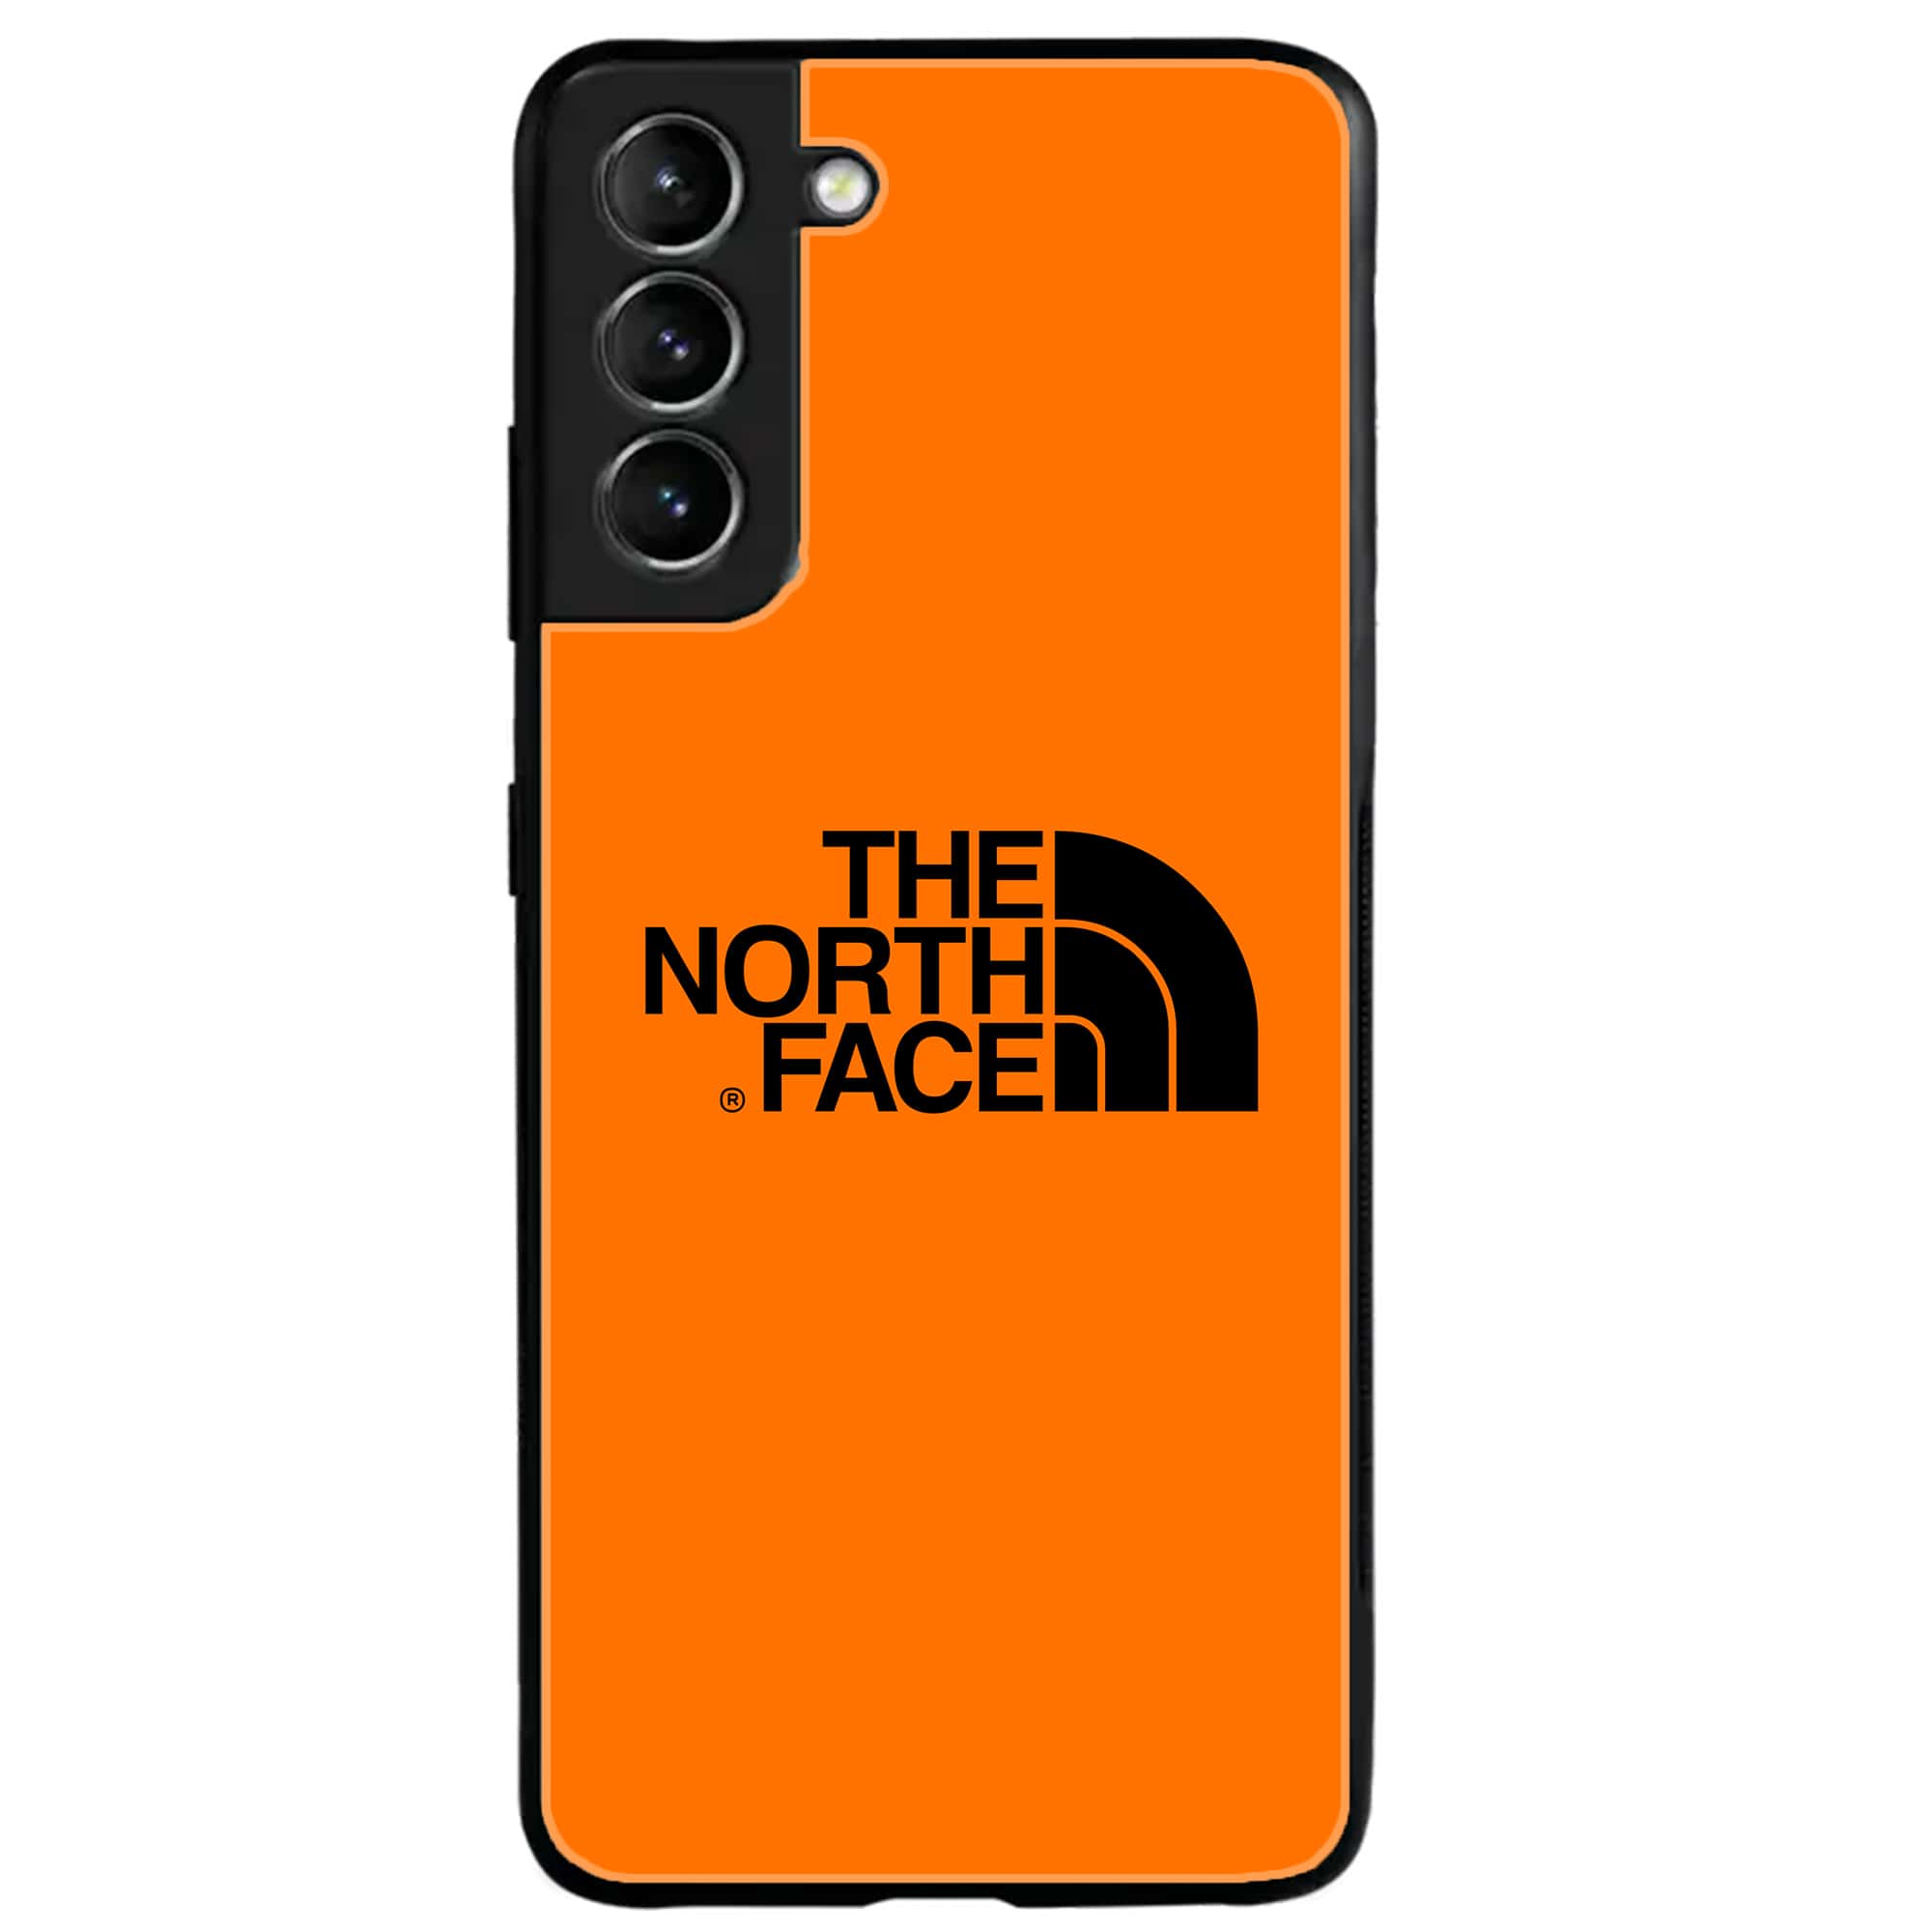 Samsung Galaxy S21 - The North Face Series - Premium Printed Glass soft Bumper shock Proof Case